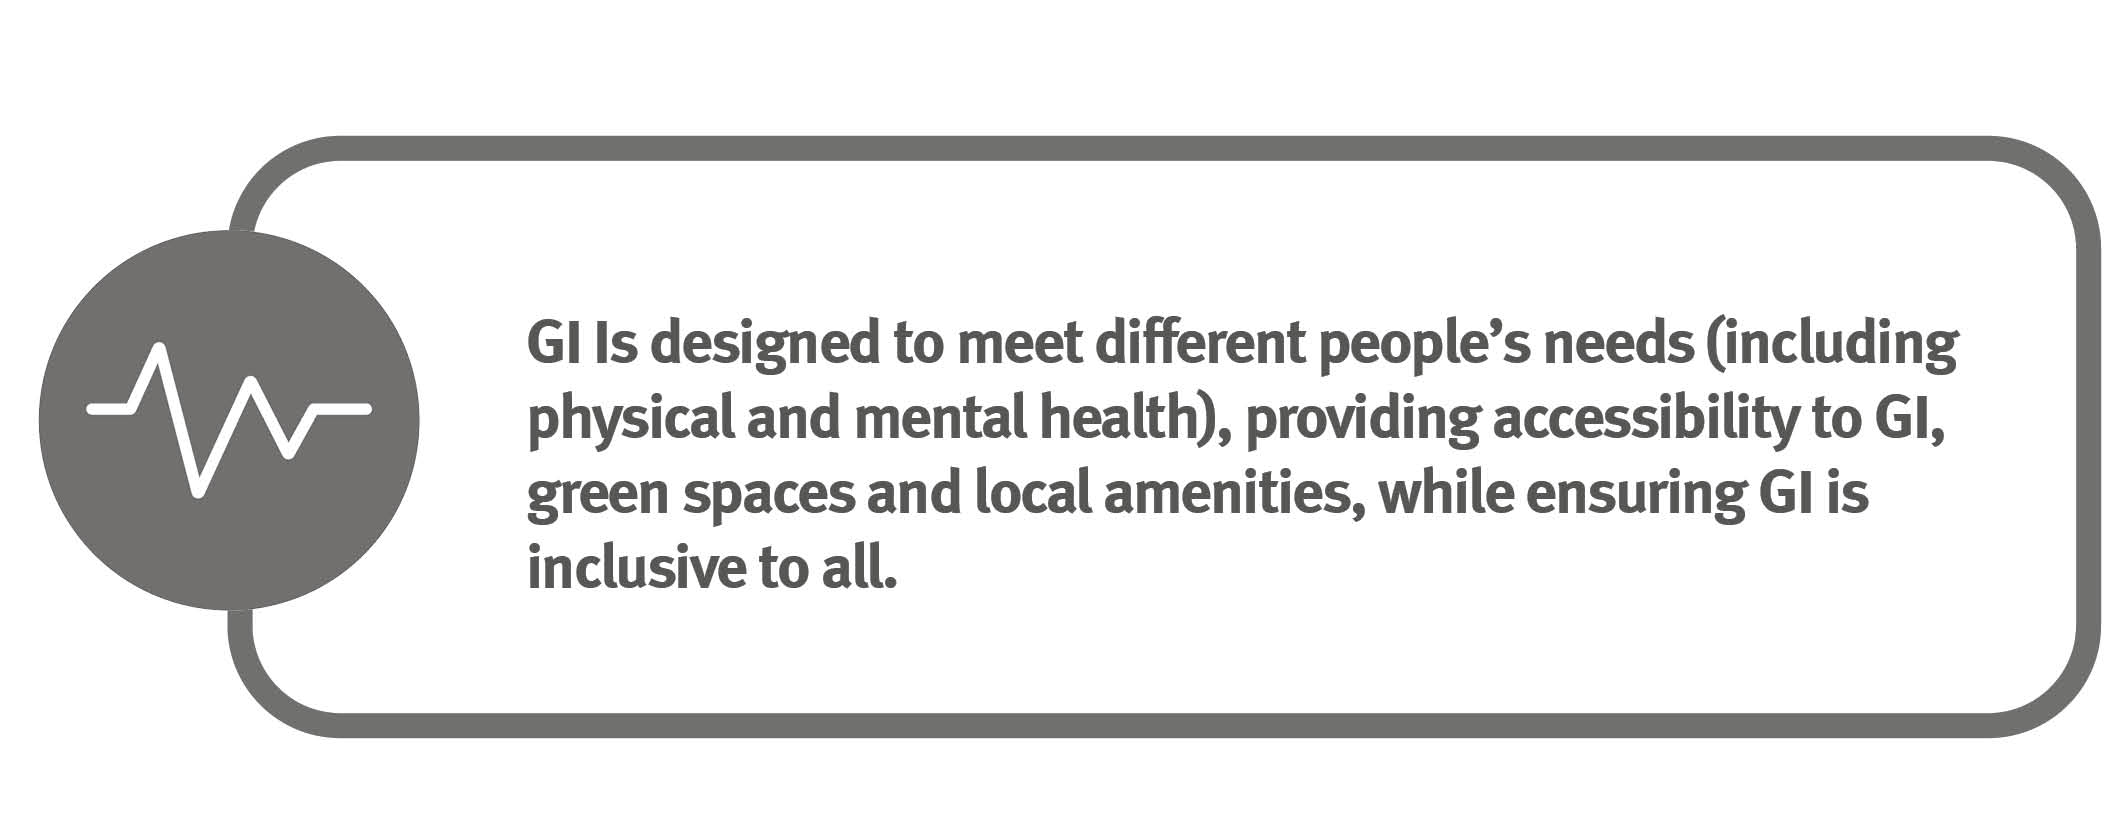 Principle 6: Health, Wellbeing and Social Equity